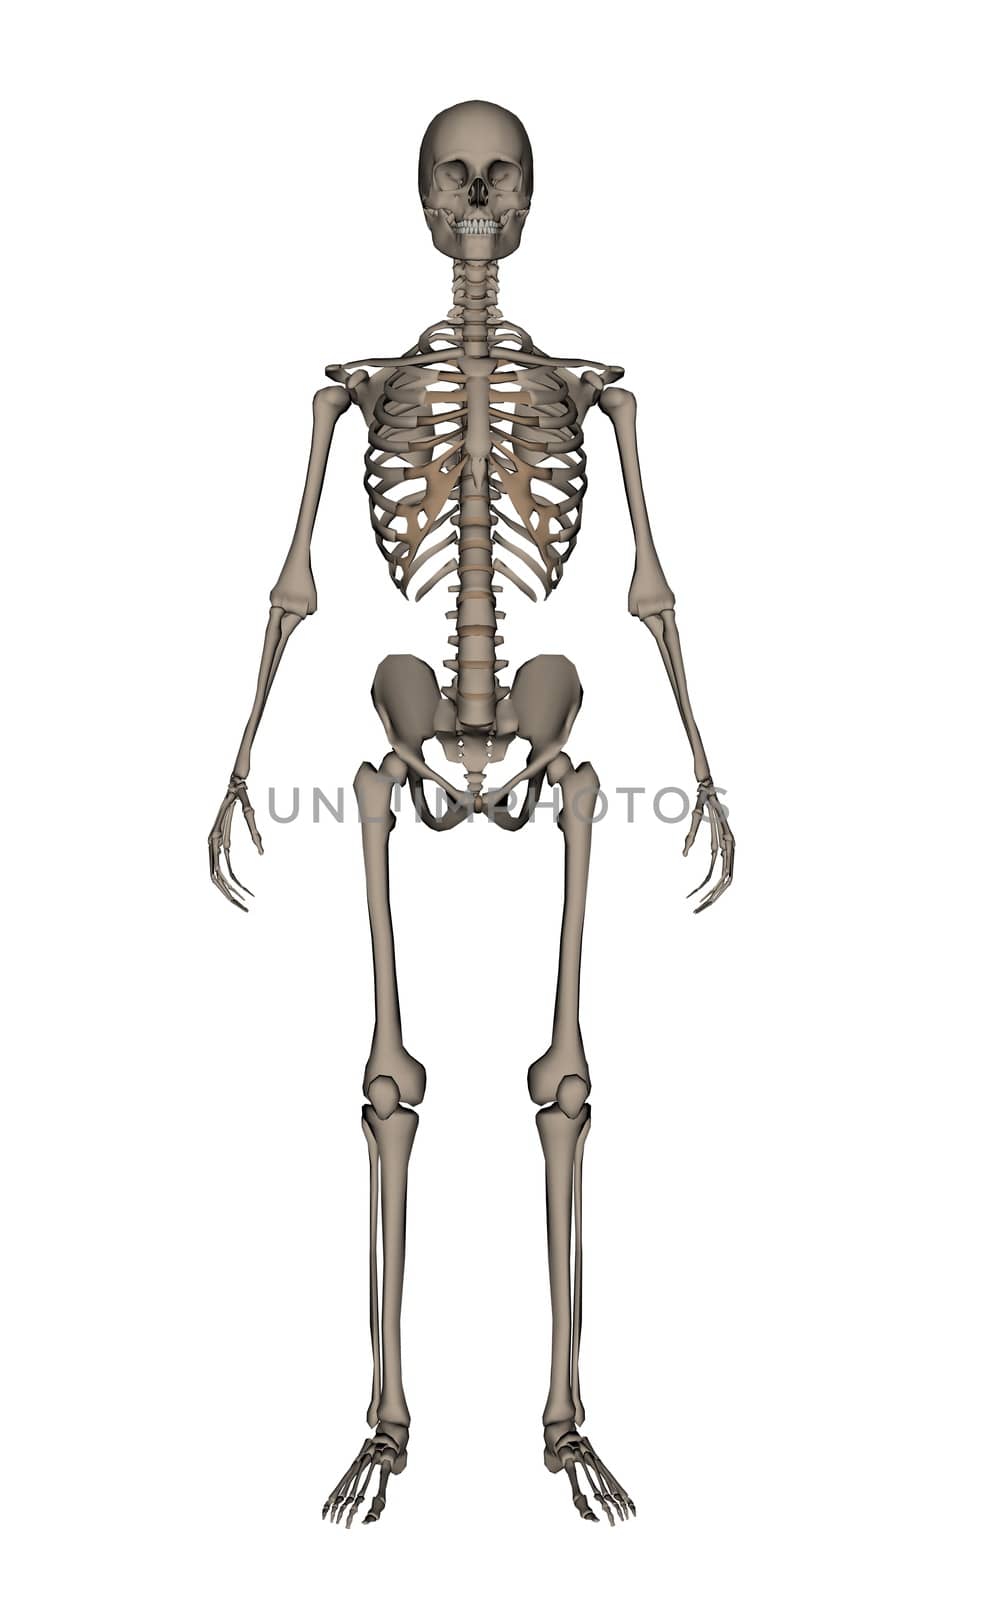 Frontview of human skeleton isolated in white background - 3D render